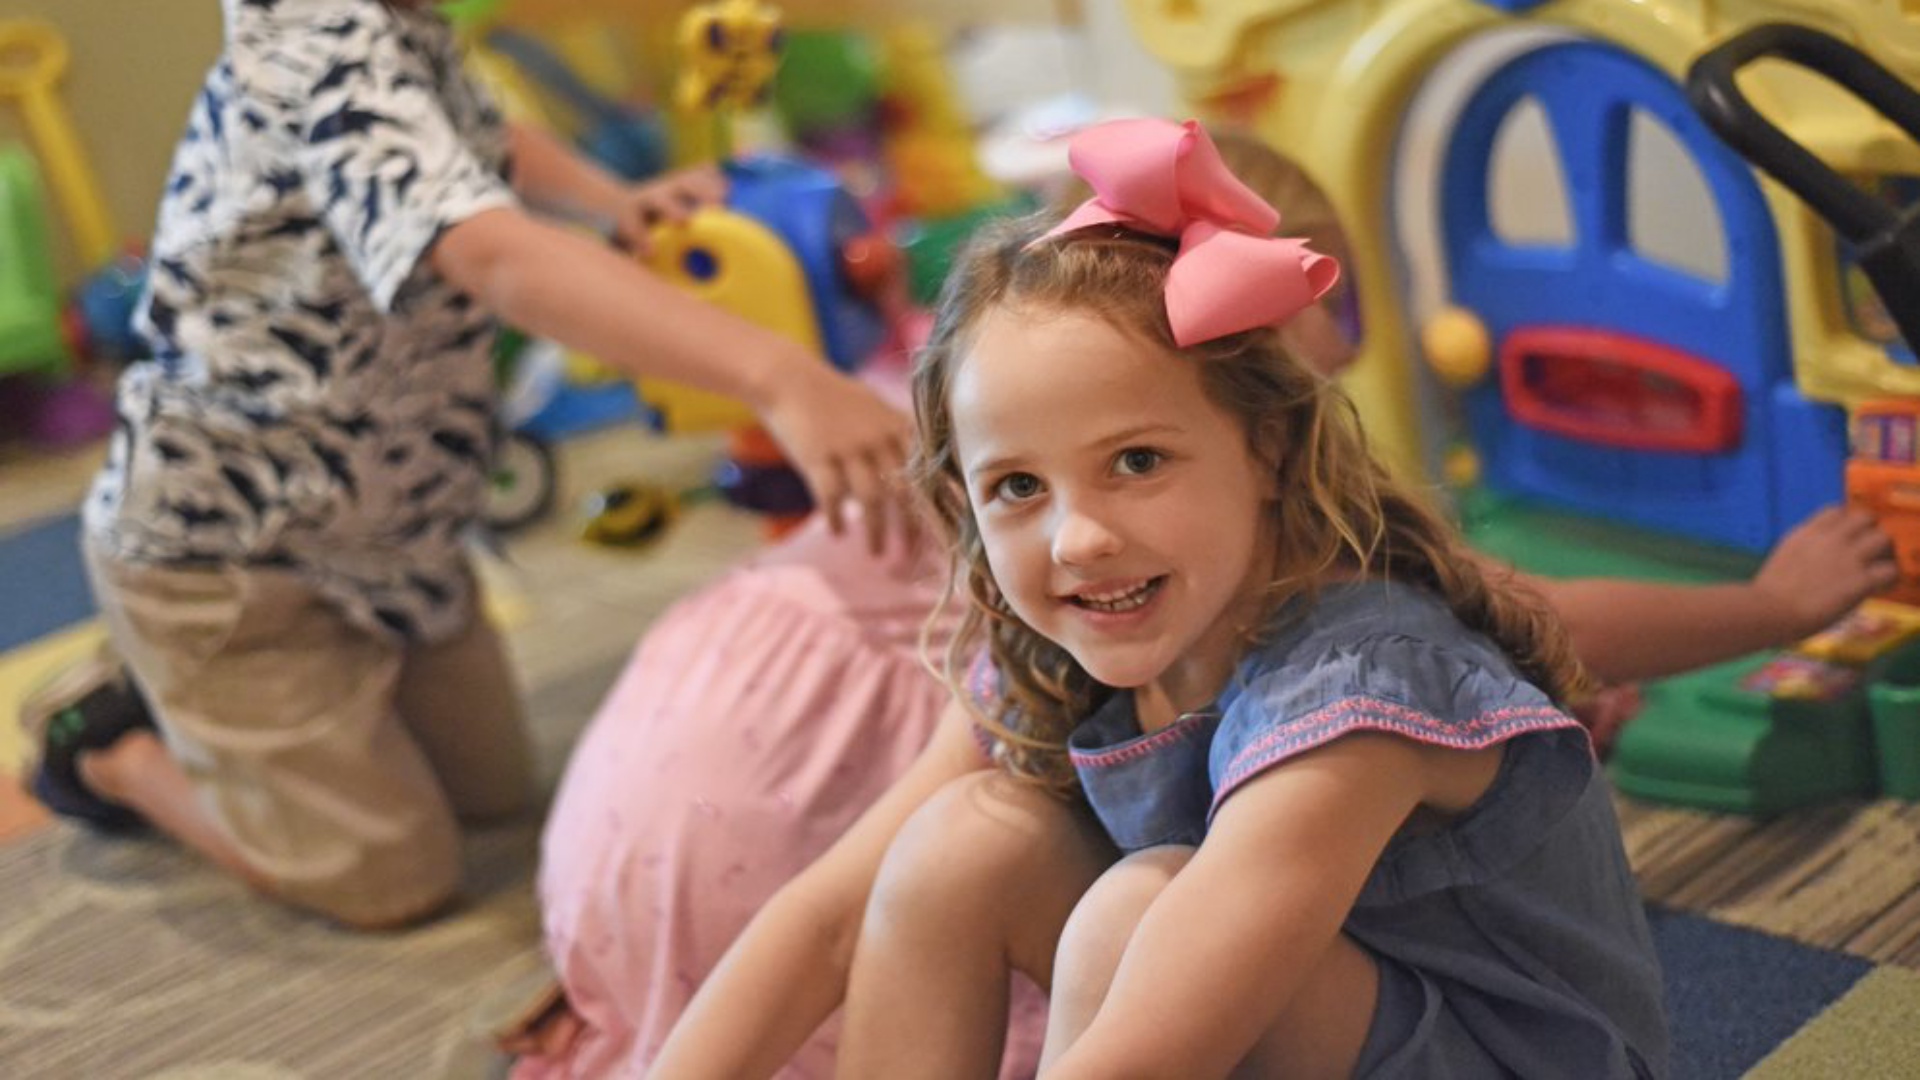 Born with a duplicate kidney and blocked ureter, not even daily medications could keep Emma well. But thanks to a first-of-its-kind surgery at Levine Children’s Hospital, she’s now looking forward to a brighter future – starting with kindergarten. 